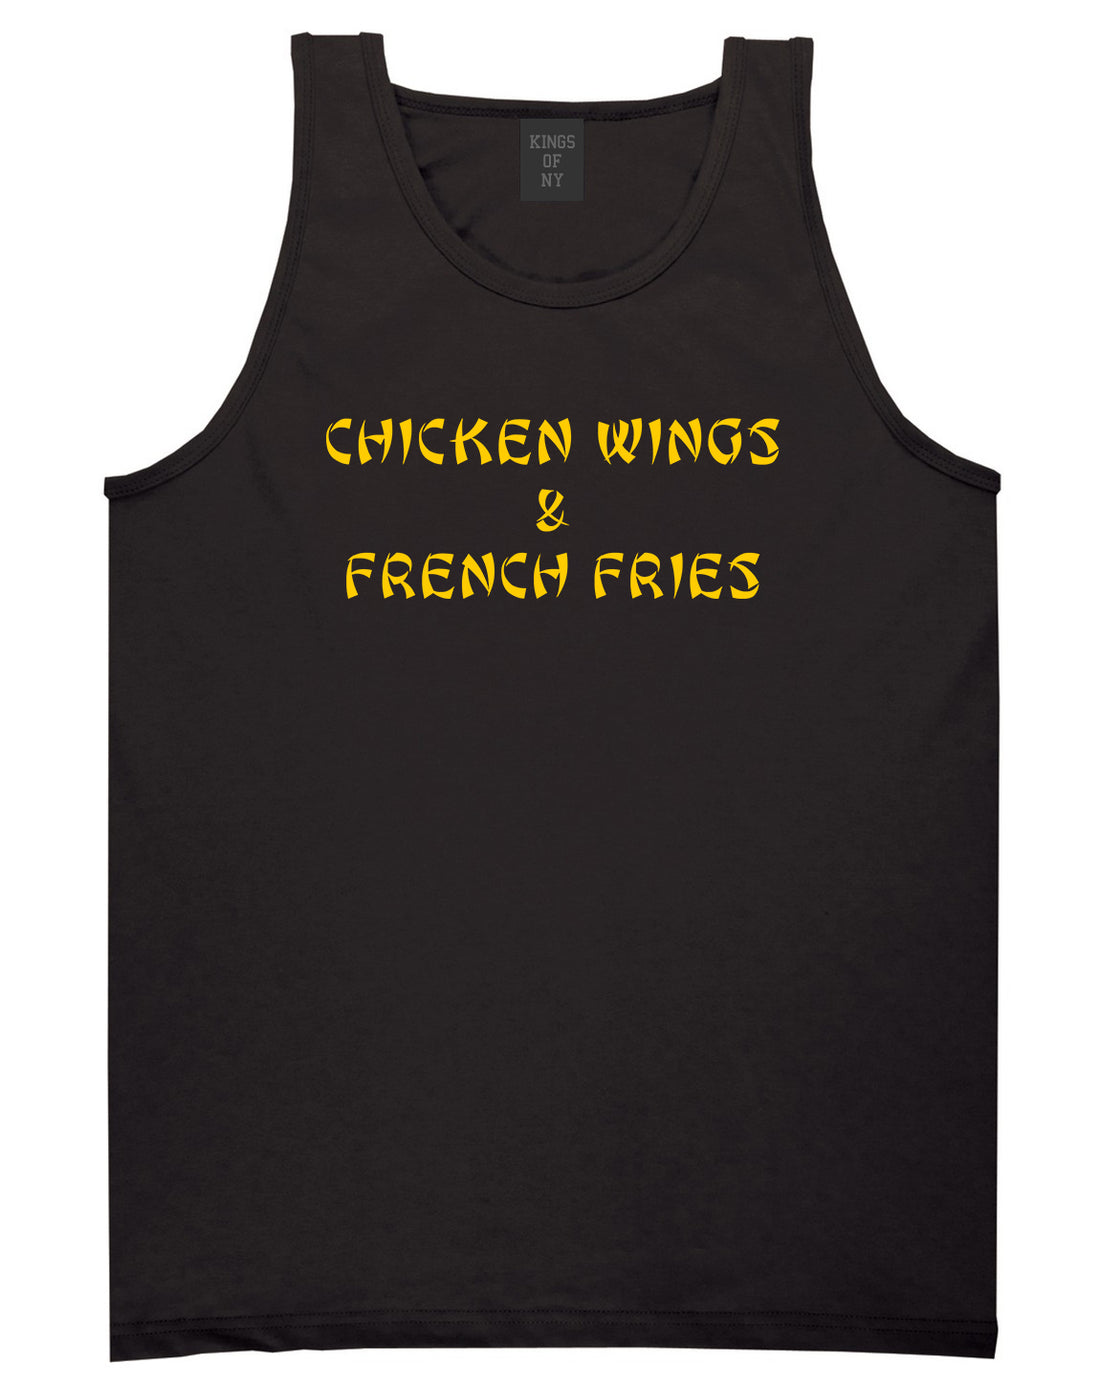 Chicken Wings And French Fries Tank Top Shirt in Black